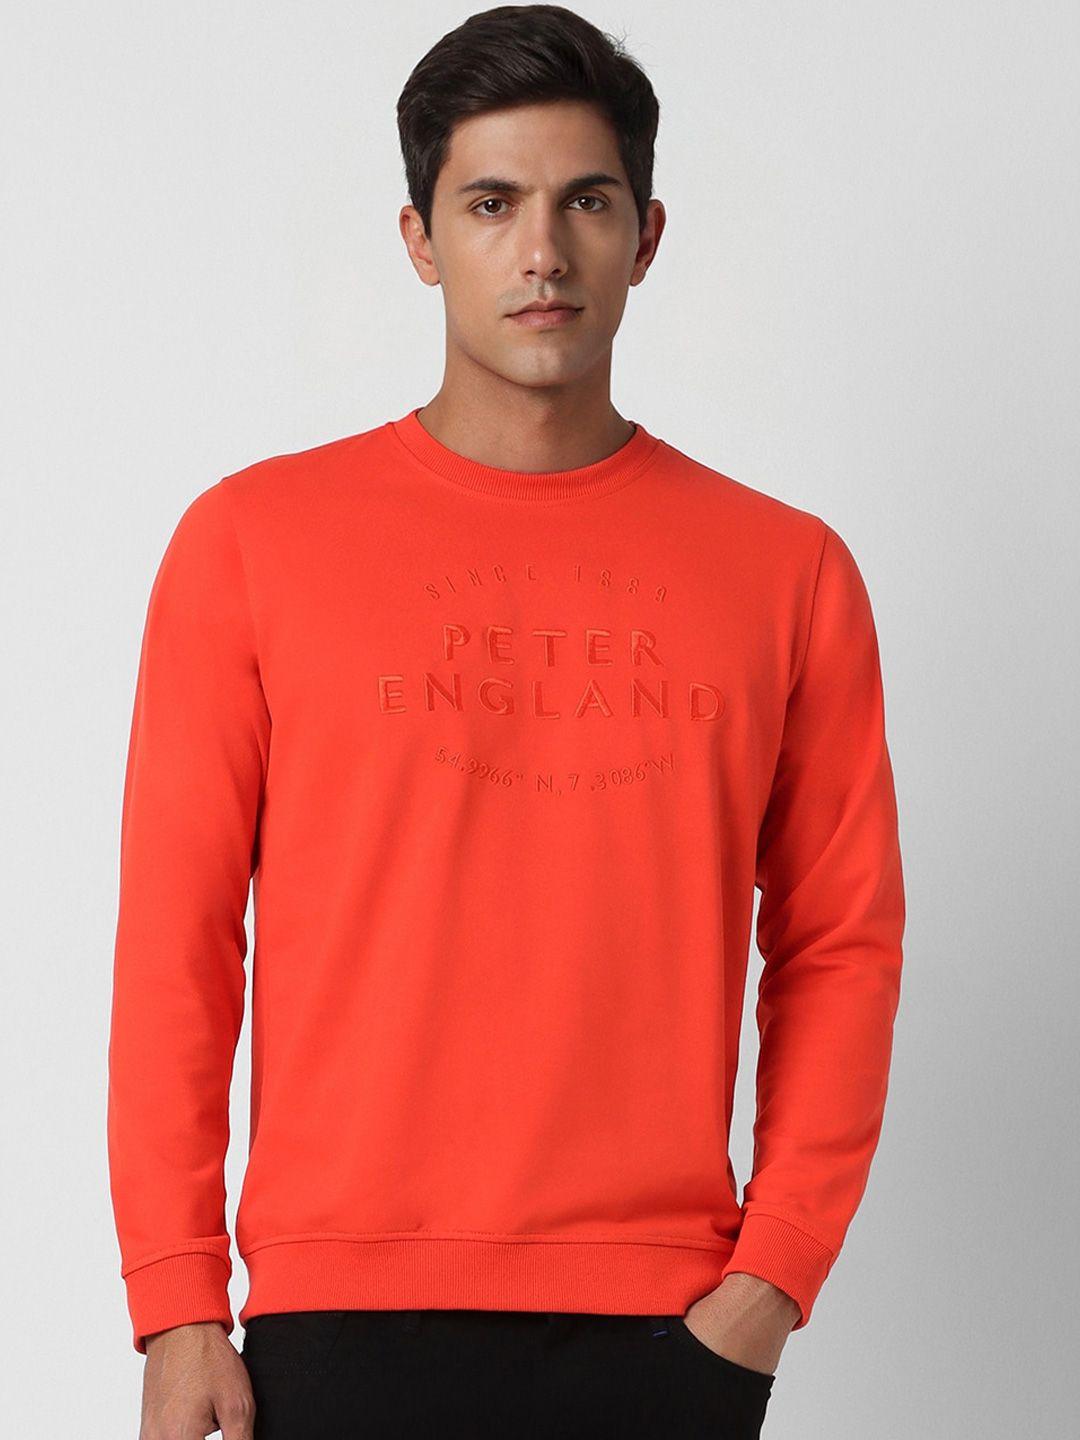 peter england typography embroidered round neck pullover